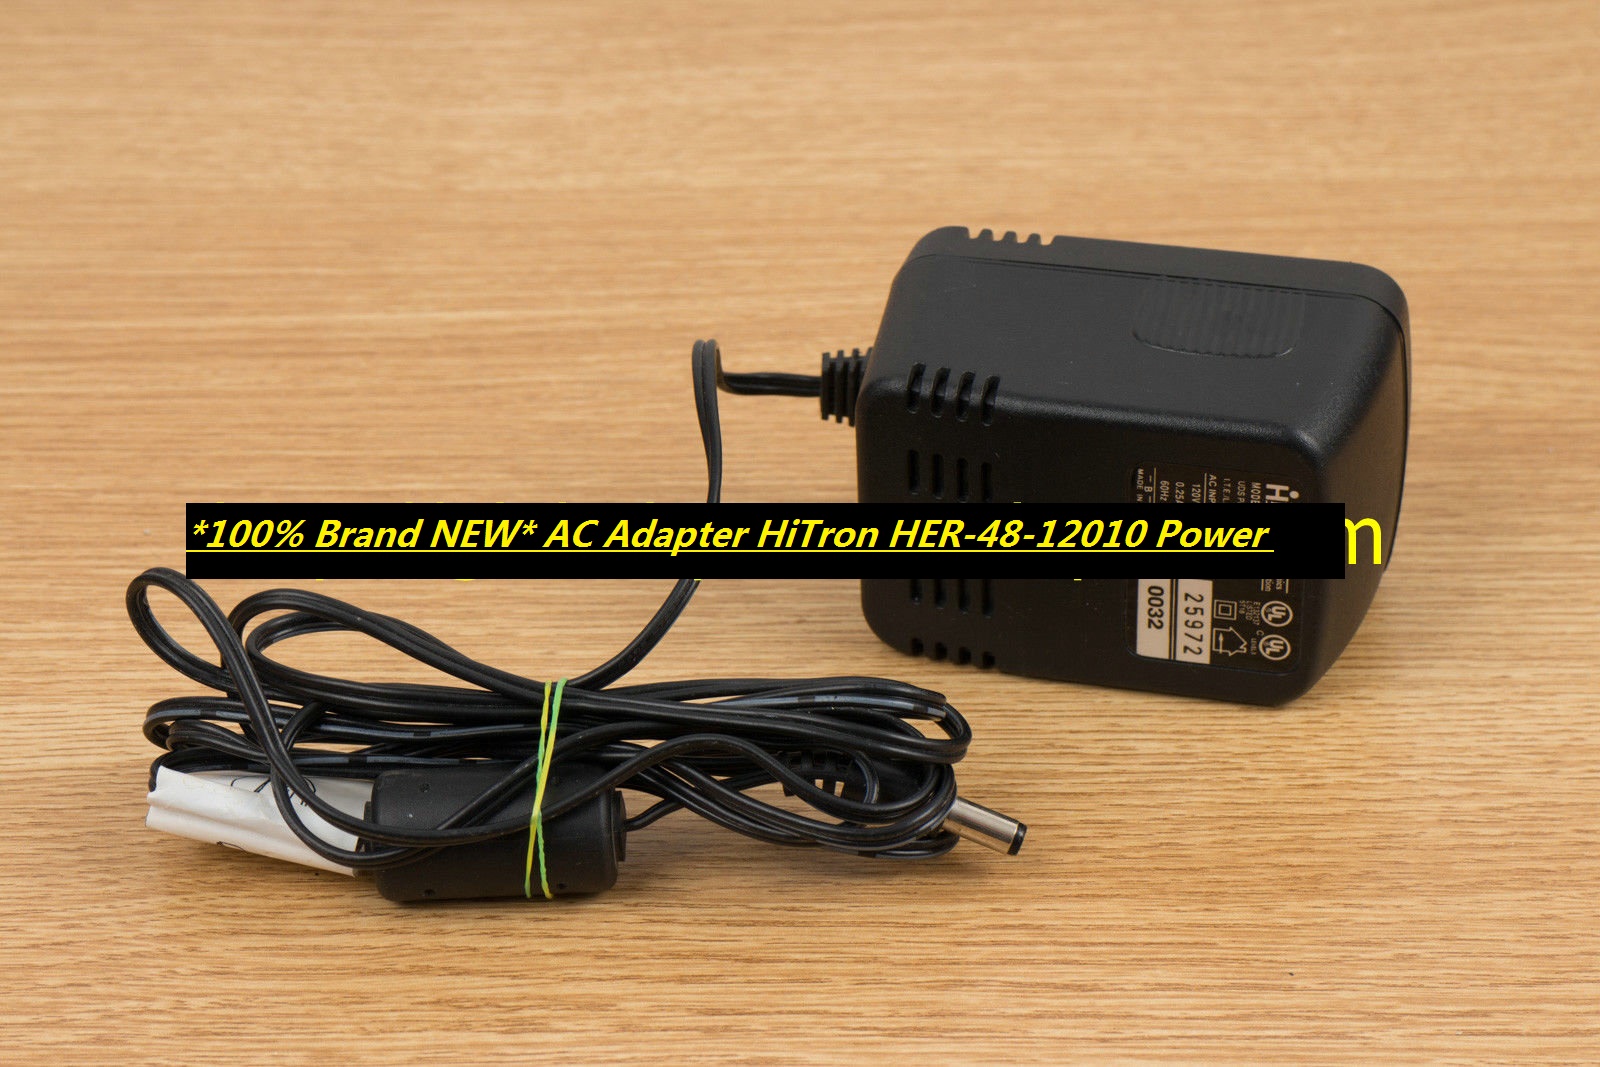 *100% Brand NEW* AC Adapter HiTron HER-48-12010 Power Supply - Click Image to Close